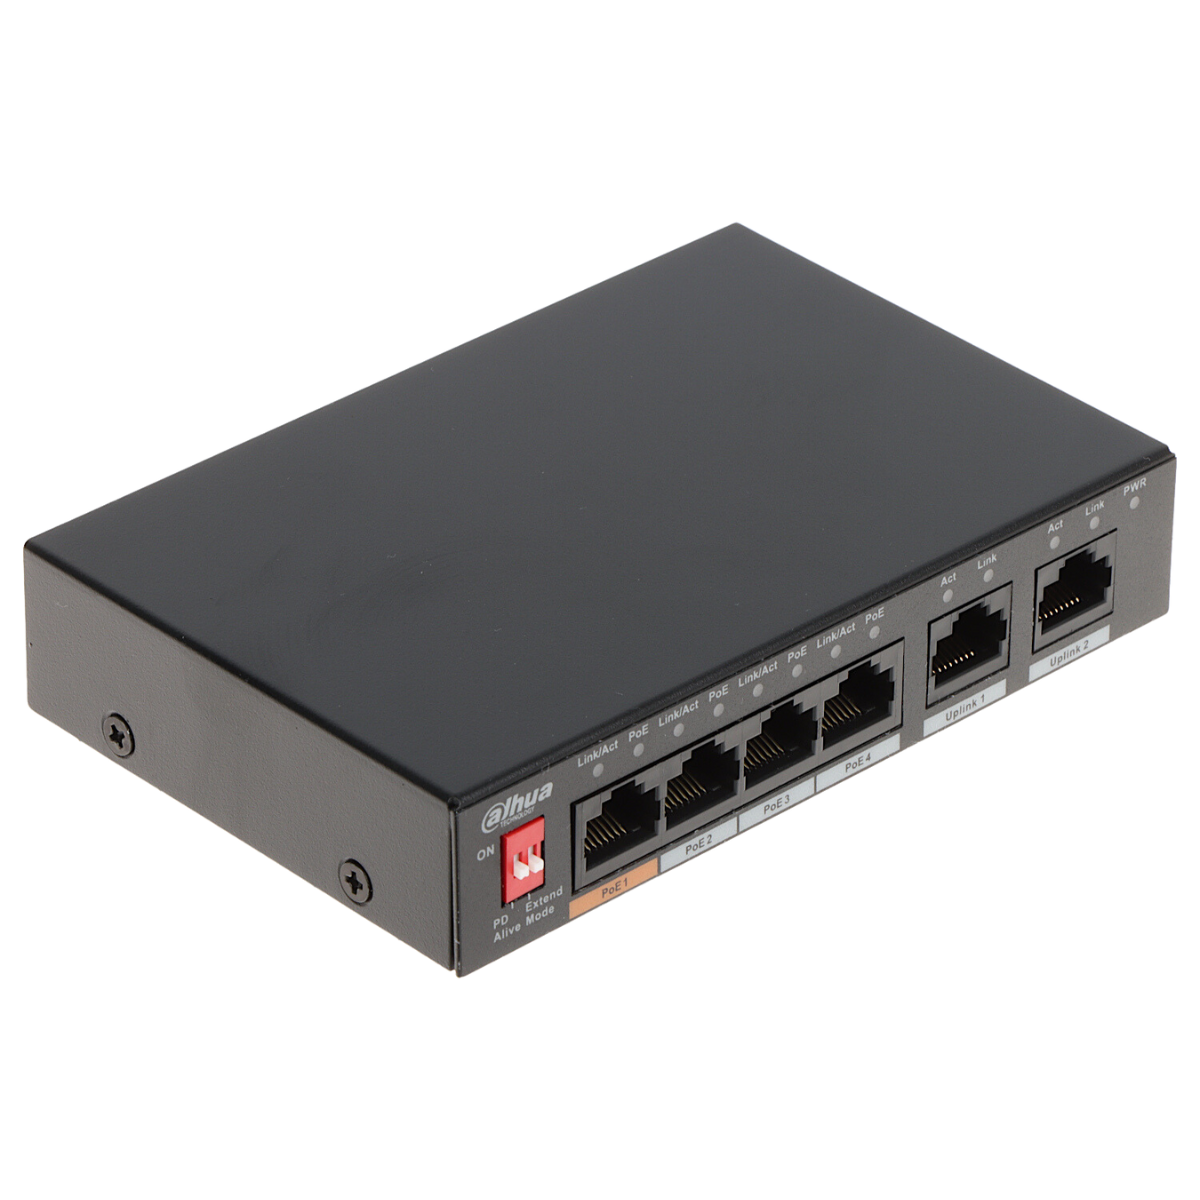 Dahua 4-port Fast Ethernet PoE Switch (Unmanaged) with 2 Uplink Ports